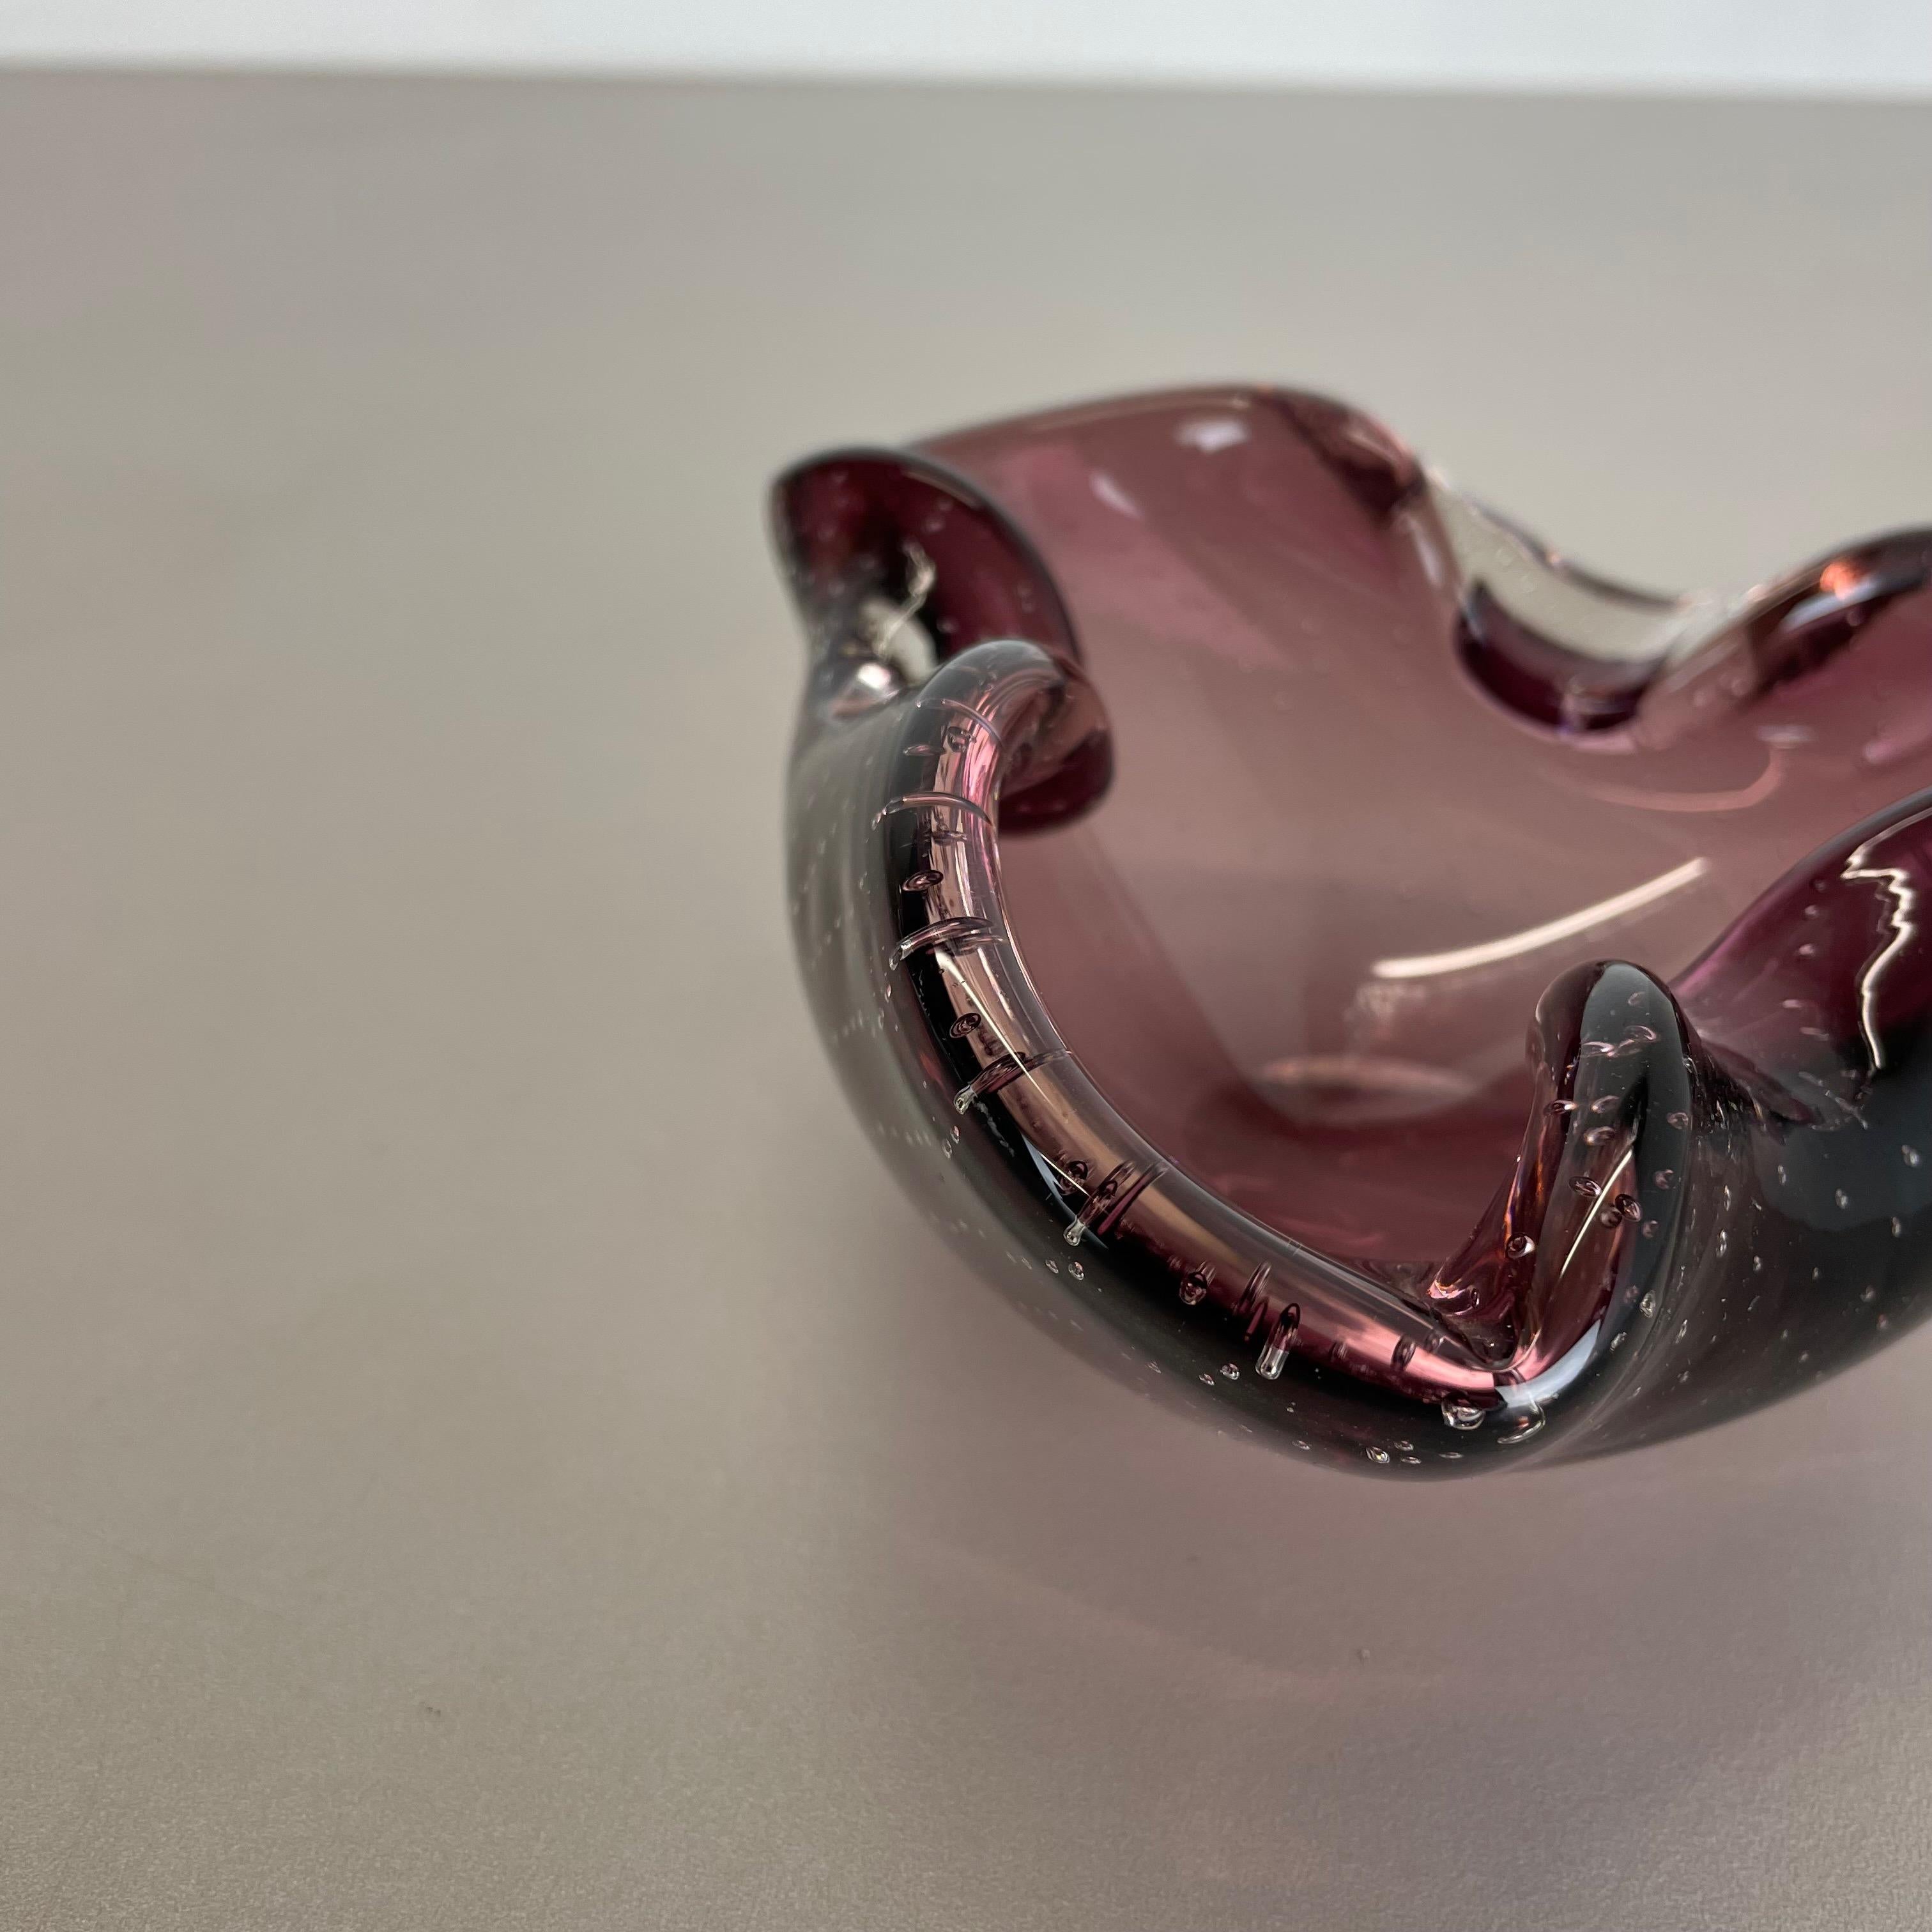 Murano Glass Large Pink Murano Bubble Glass Bowl Element Shell Ashtray Murano, Italy, 1970s For Sale